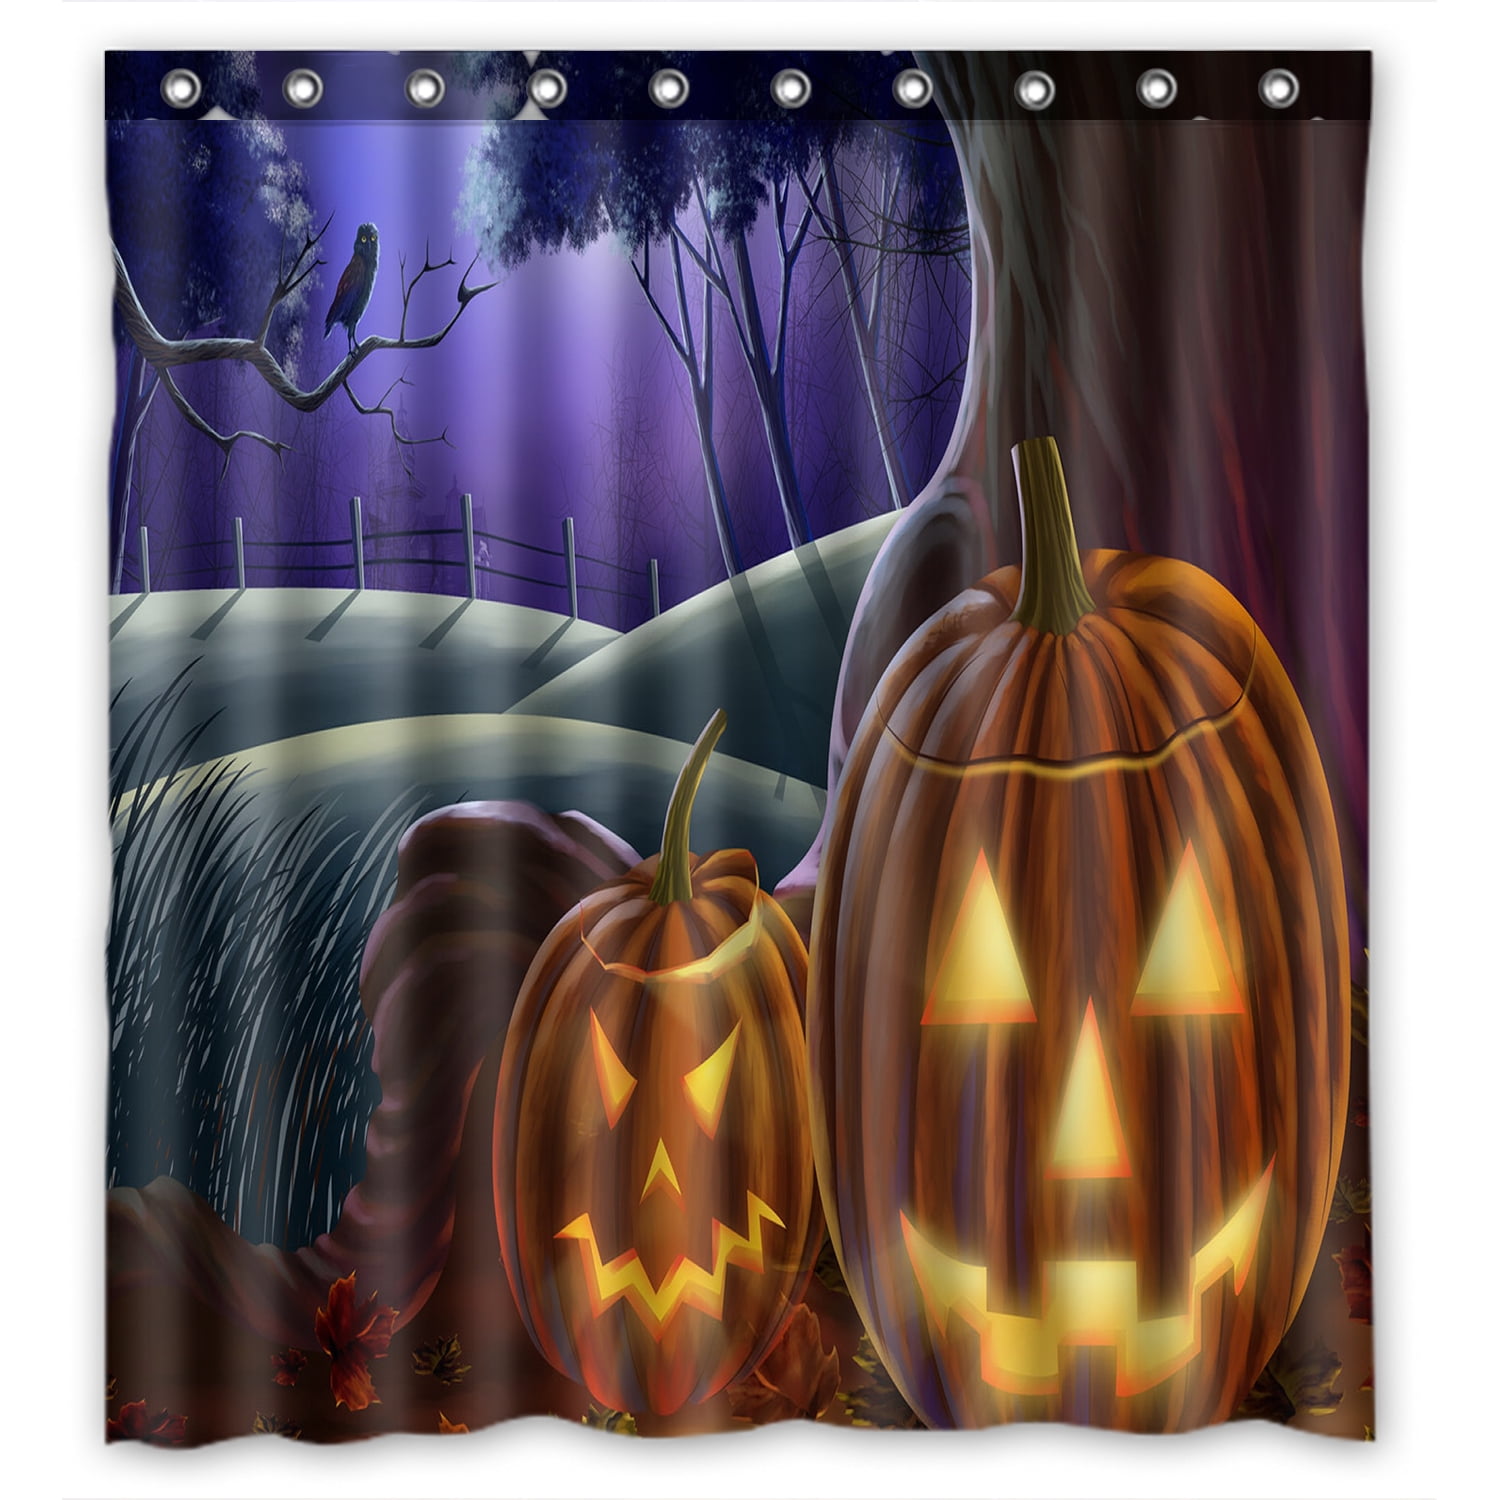 60/72" Witch with Black Cat Ride the Broom Halloween Funny Shower Curtain Set 